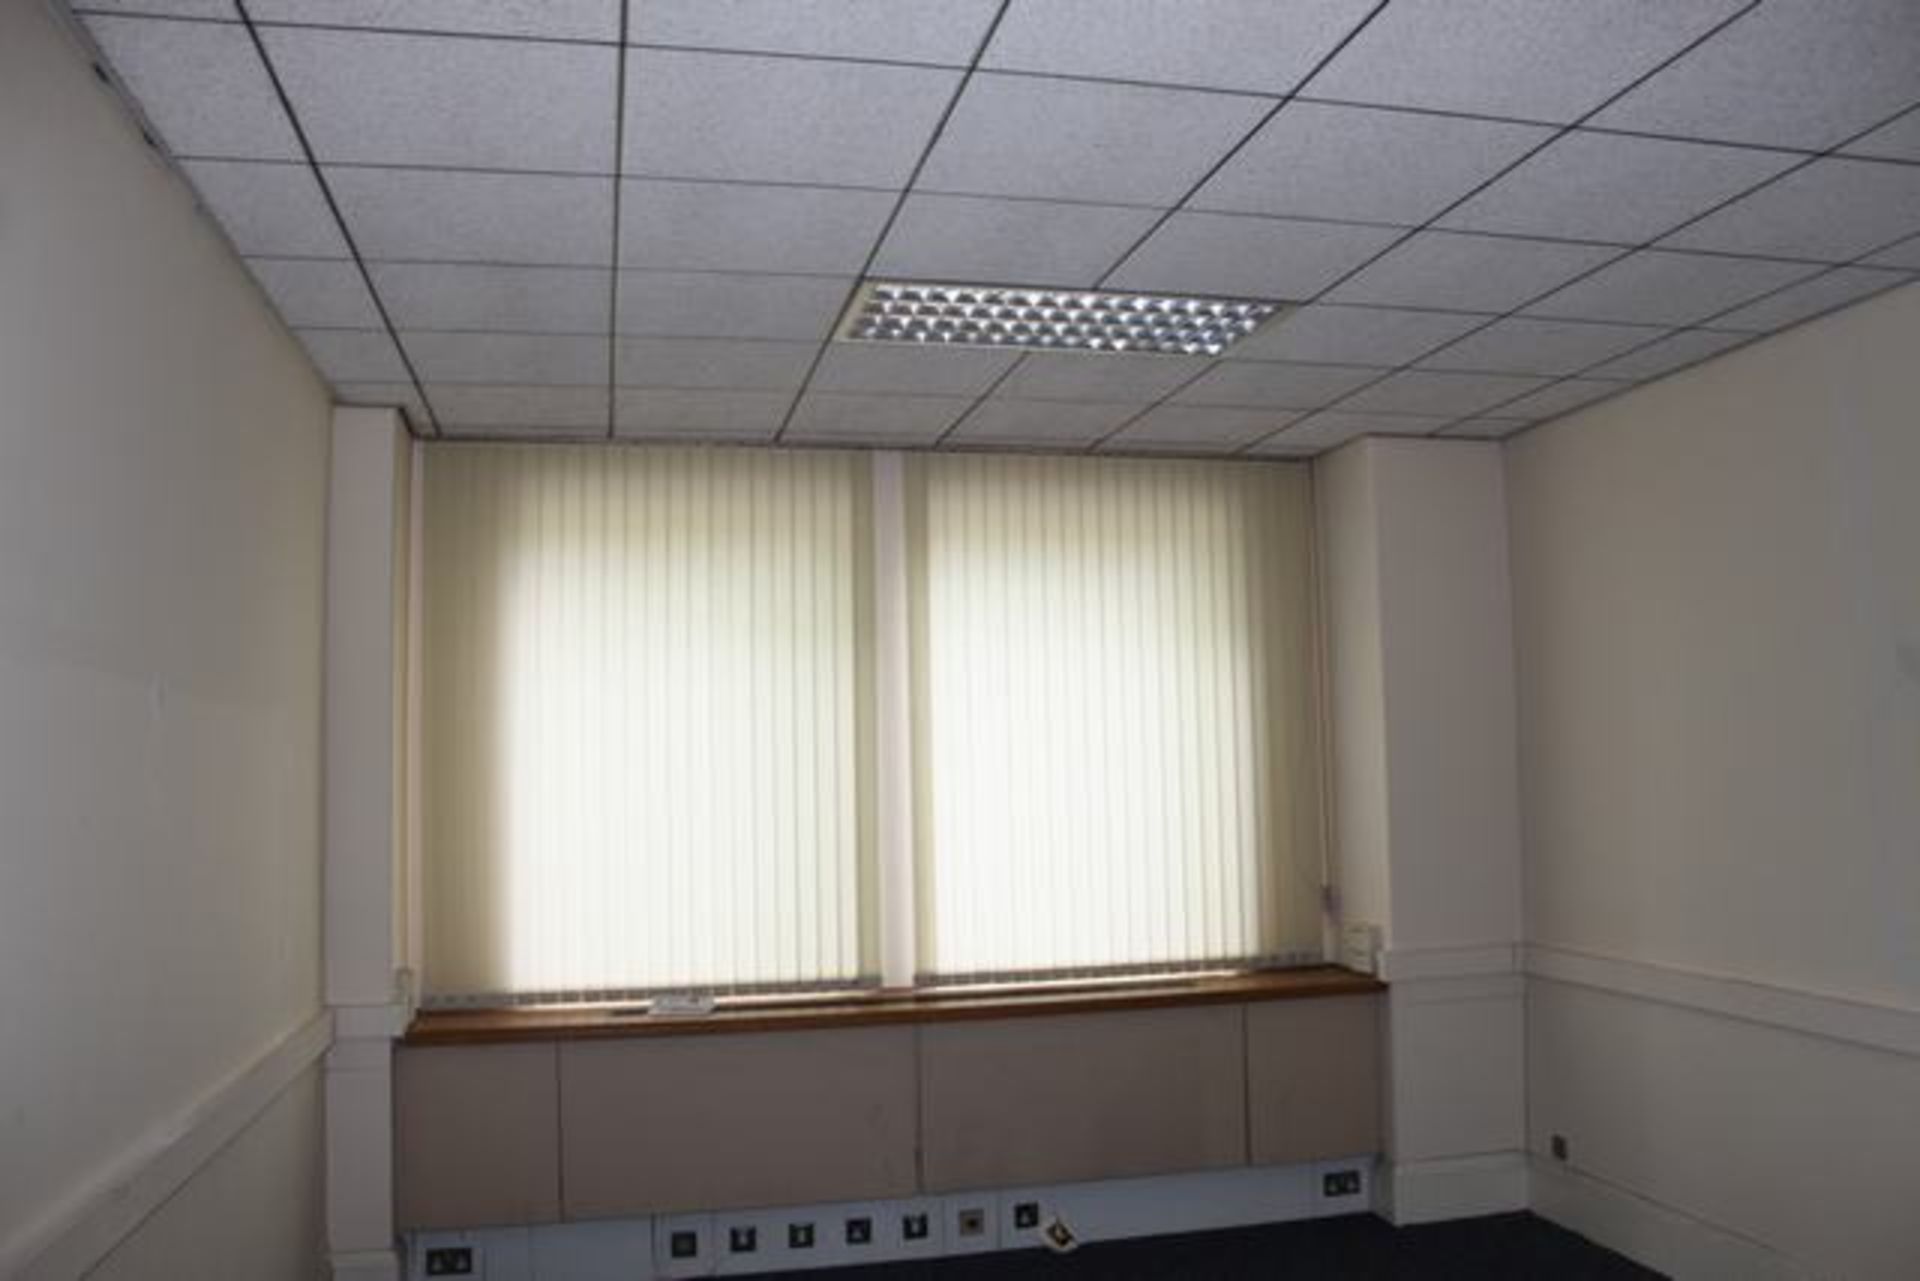 Vertical blind cream 3400mm x 2000mm complete with robust aluminium head rail with beaded tilt chain